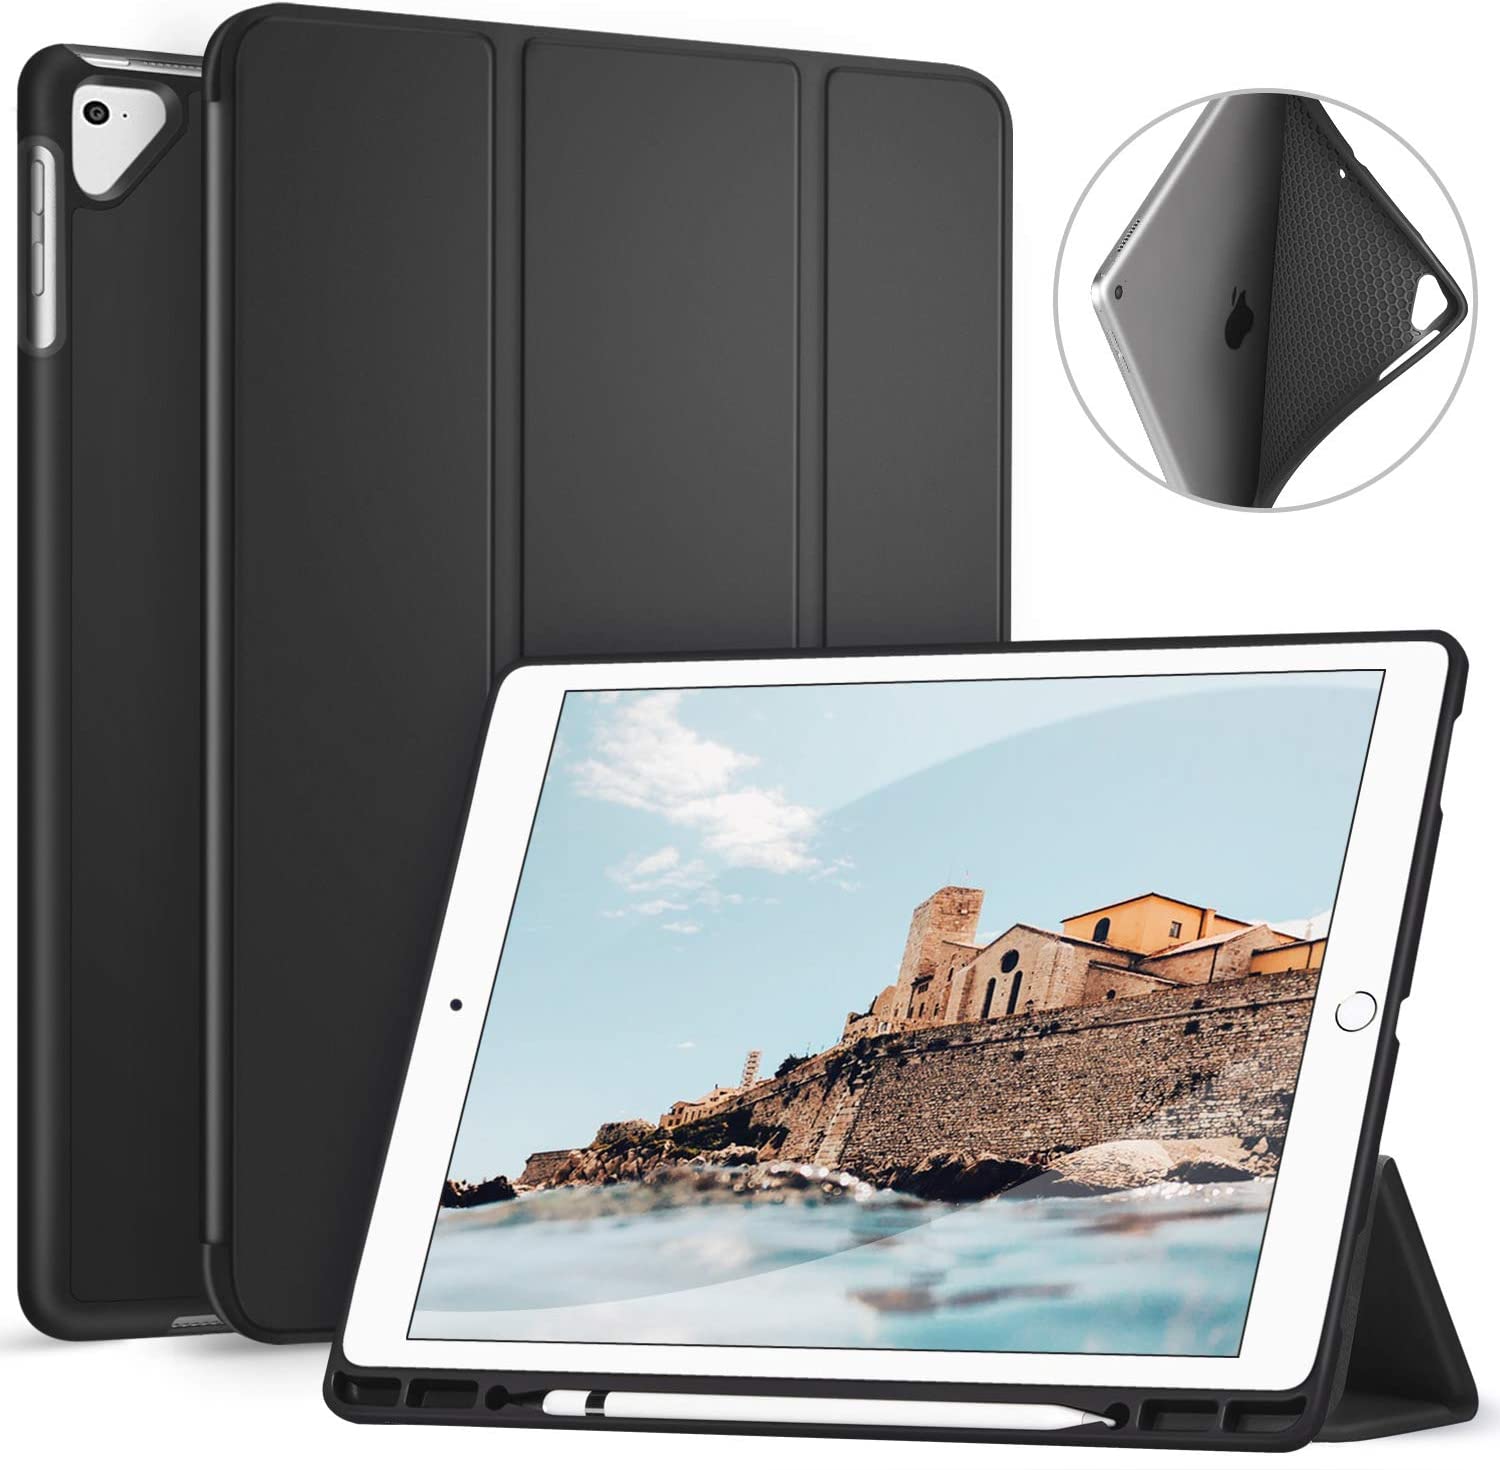 Ztotop Case for iPad Pro 12.9 Inch 2017/2015 with Pencil Holder- Lightweight Soft TPU Back Cover and Trifold Stand with Auto Sleep/Wake. - e4cents